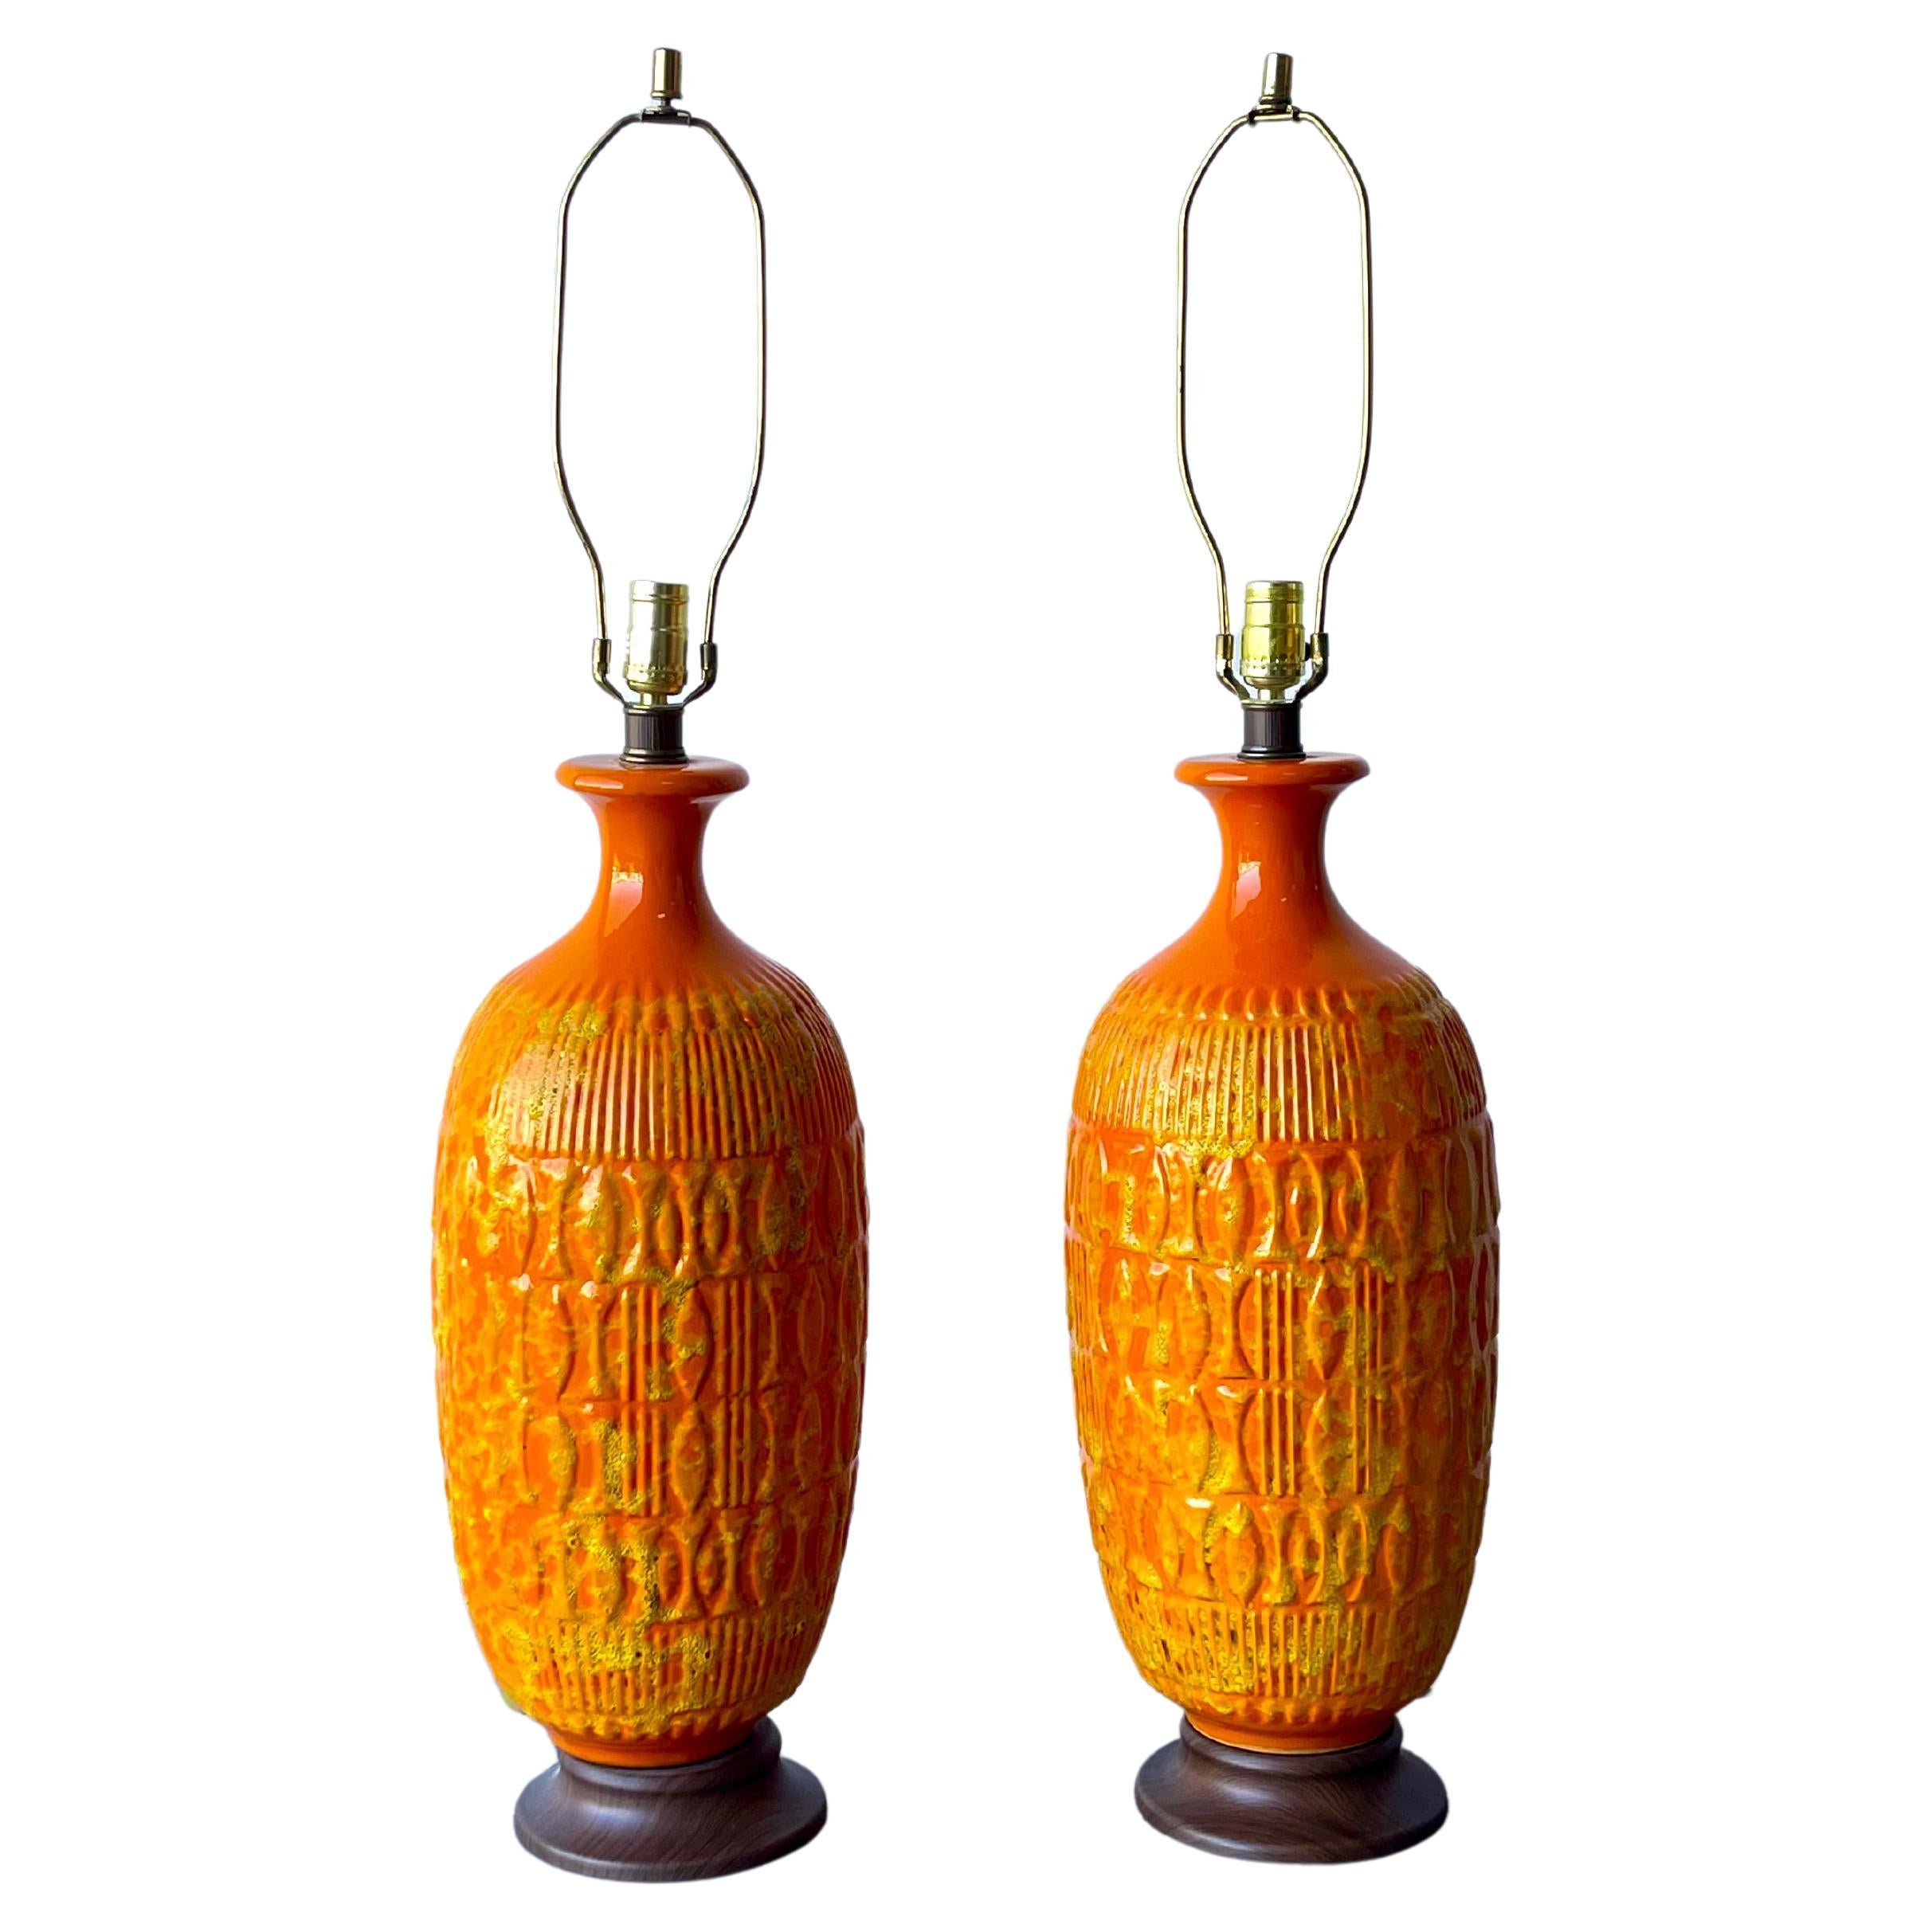 Pair of Mid-Century Modern Orange and Yellow Dripped Glazed Ceramic Lamps For Sale